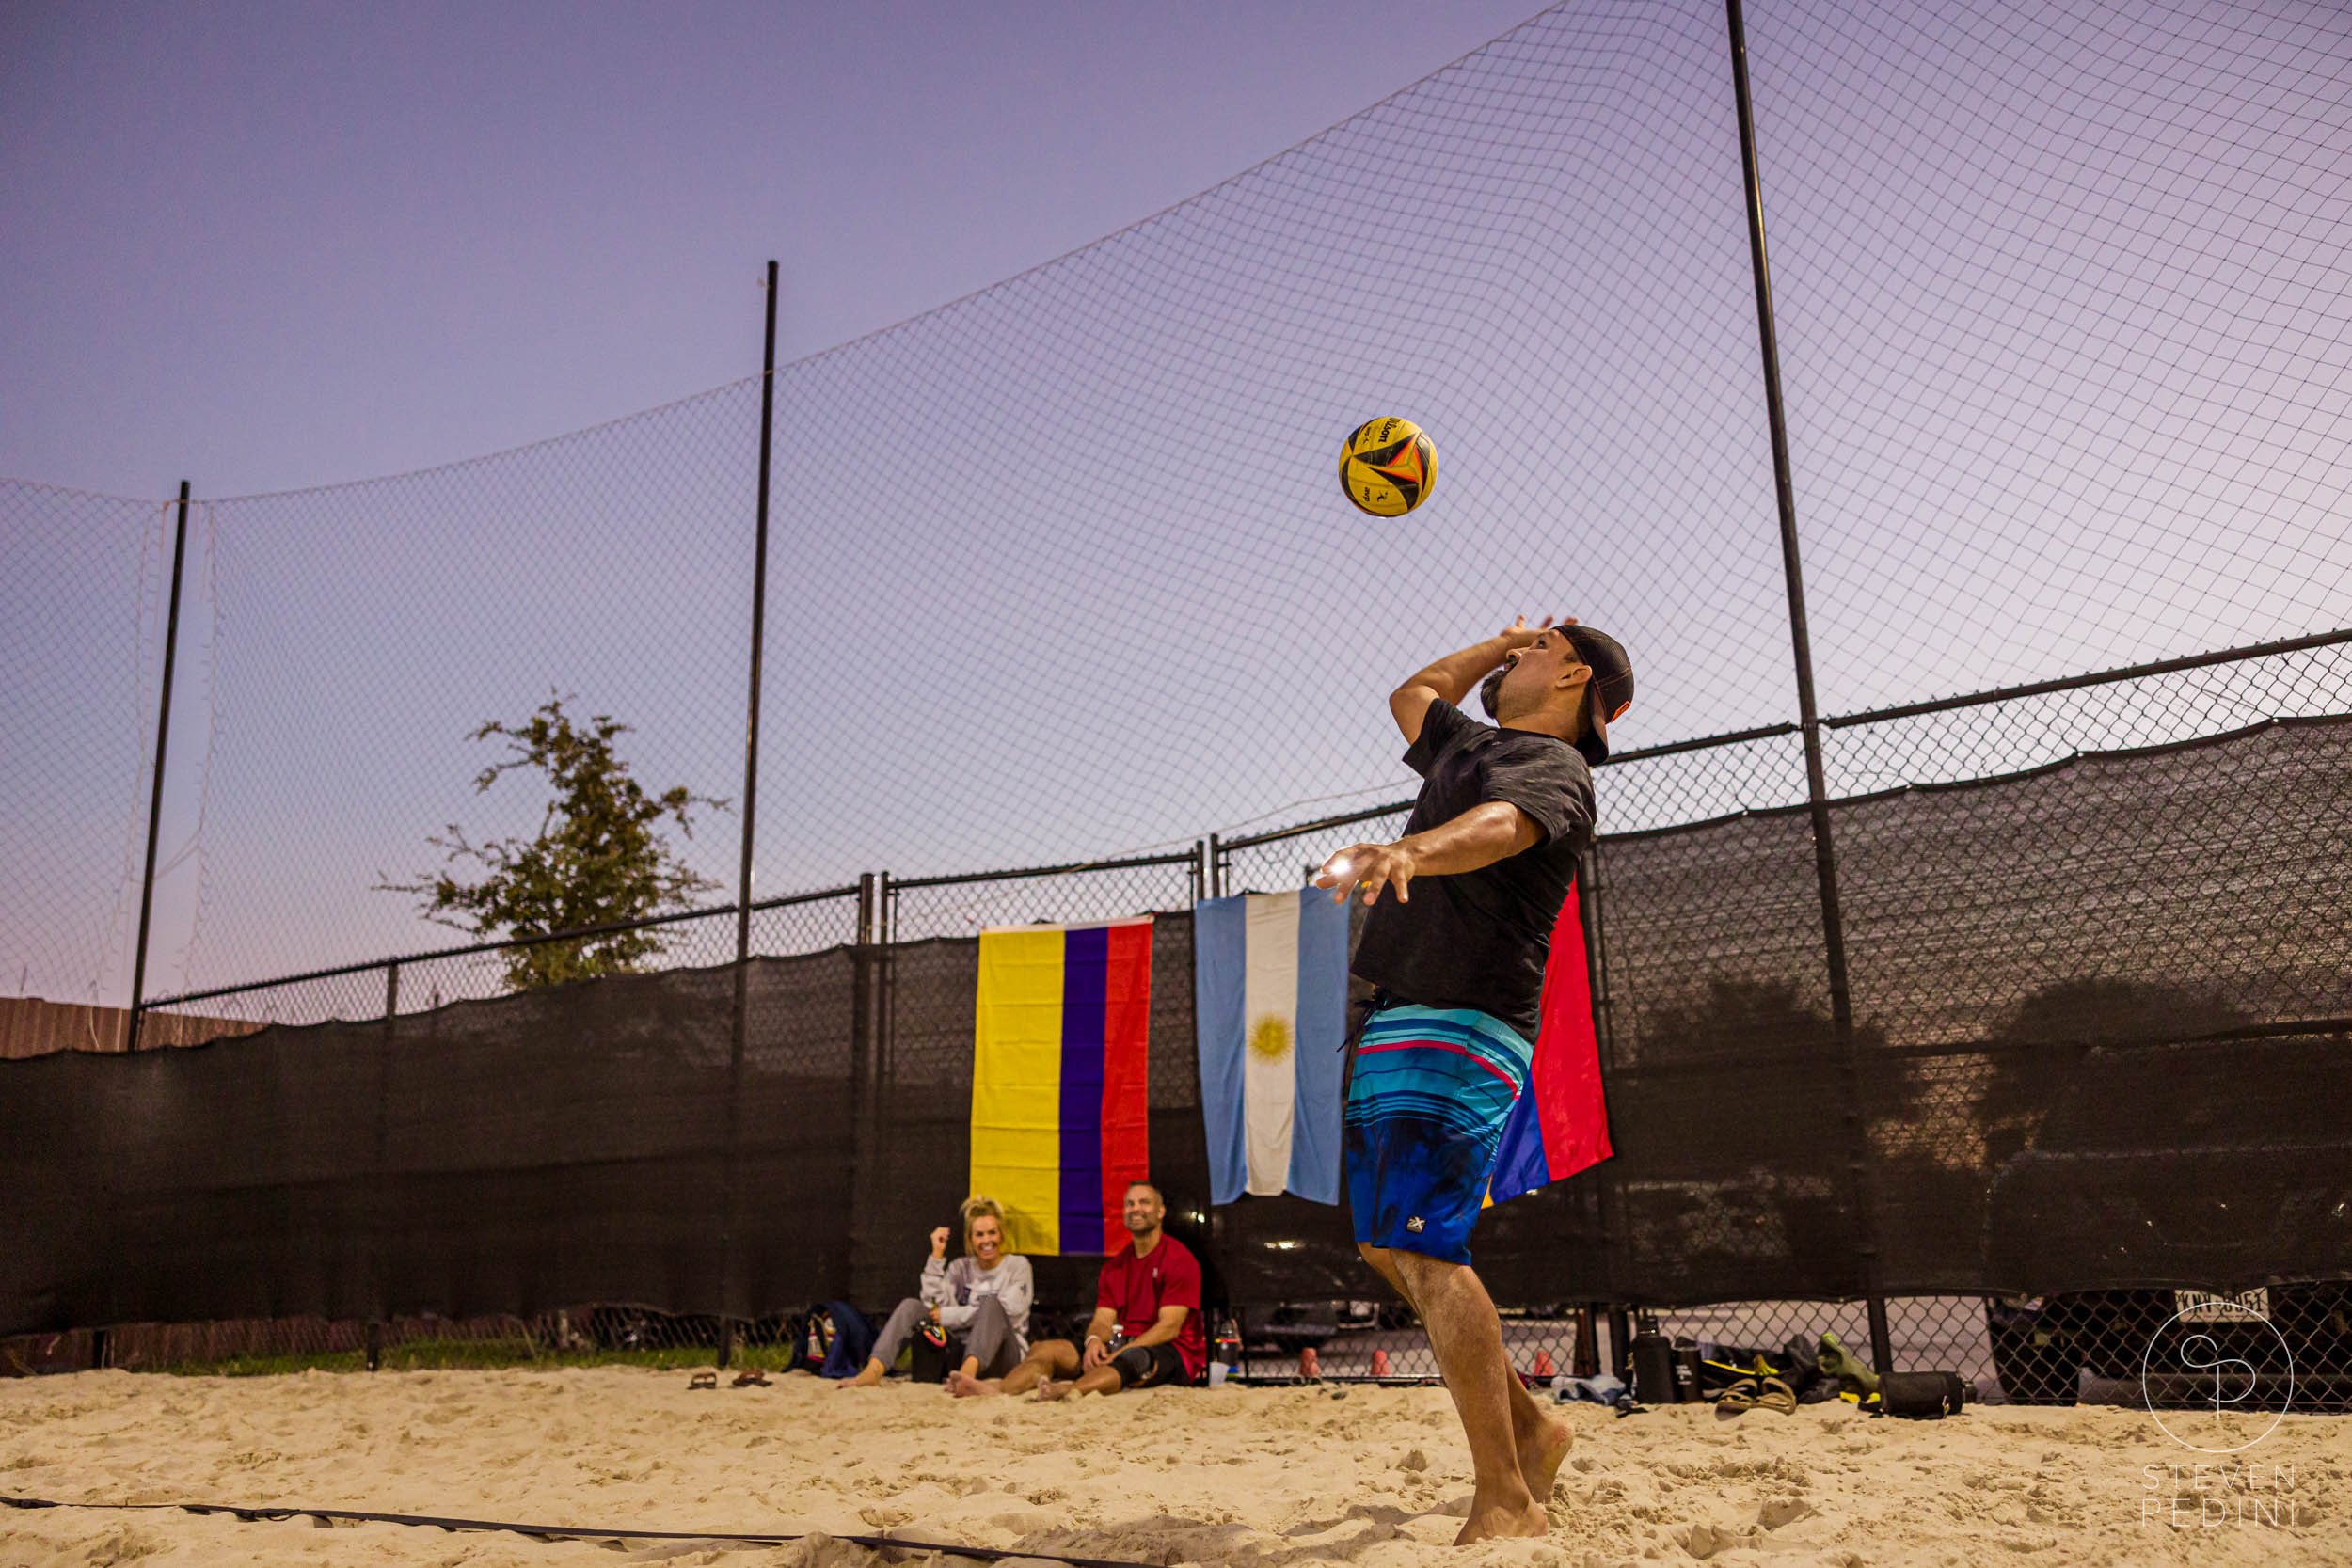 Steven Pedini Photography - Bumpy Pickle - Sand Volleyball - Houston TX - World Cup of Volleyball - 00296.jpg